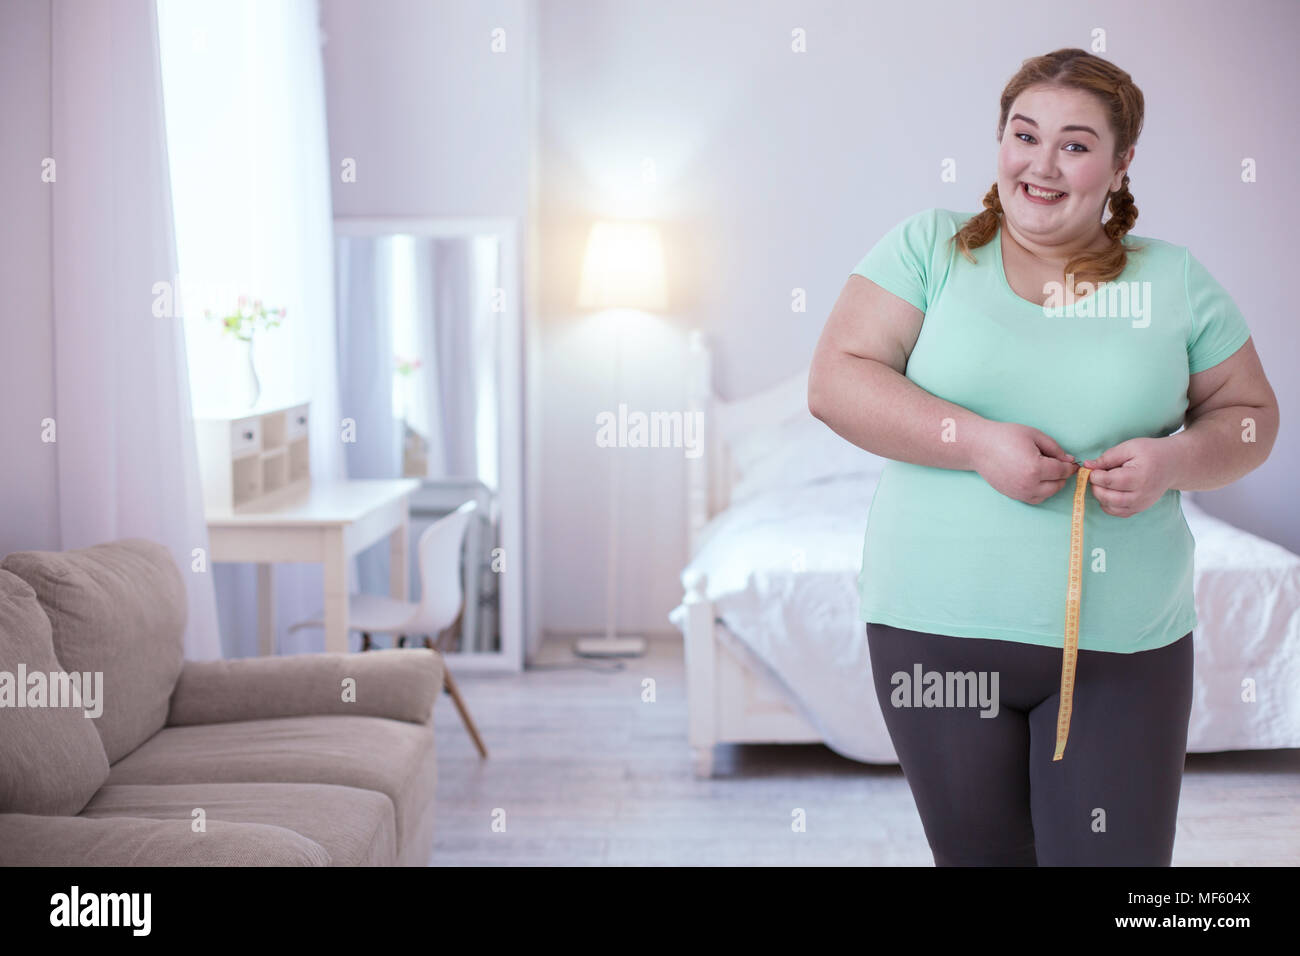 Astonished plump woman estimating her measurements Stock Photo